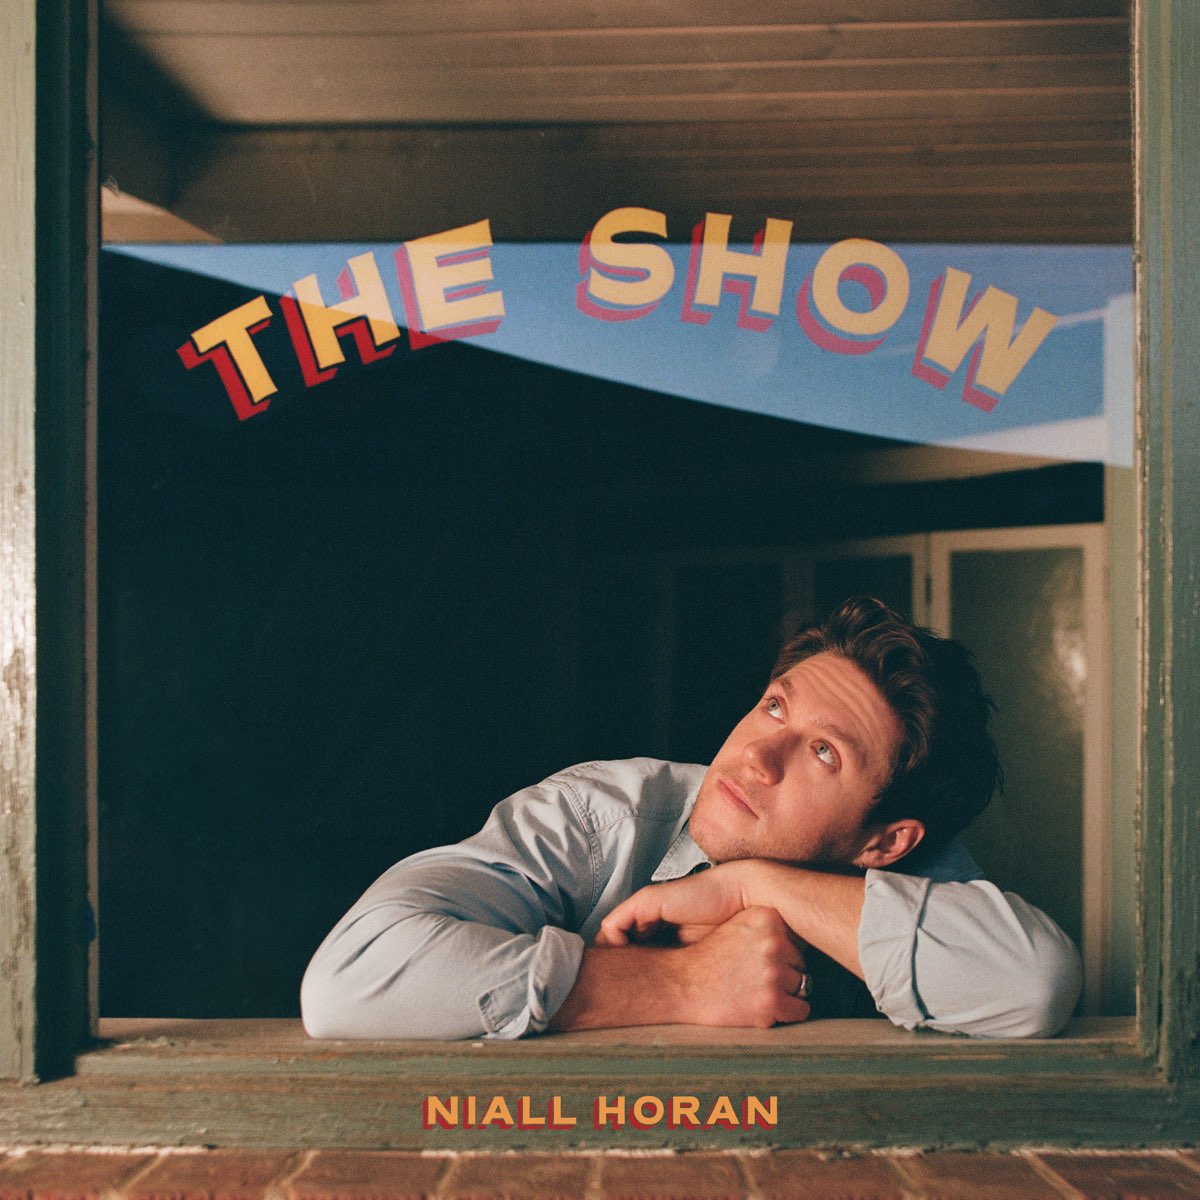 ‎The Show - Album by Niall Horan - Apple Music